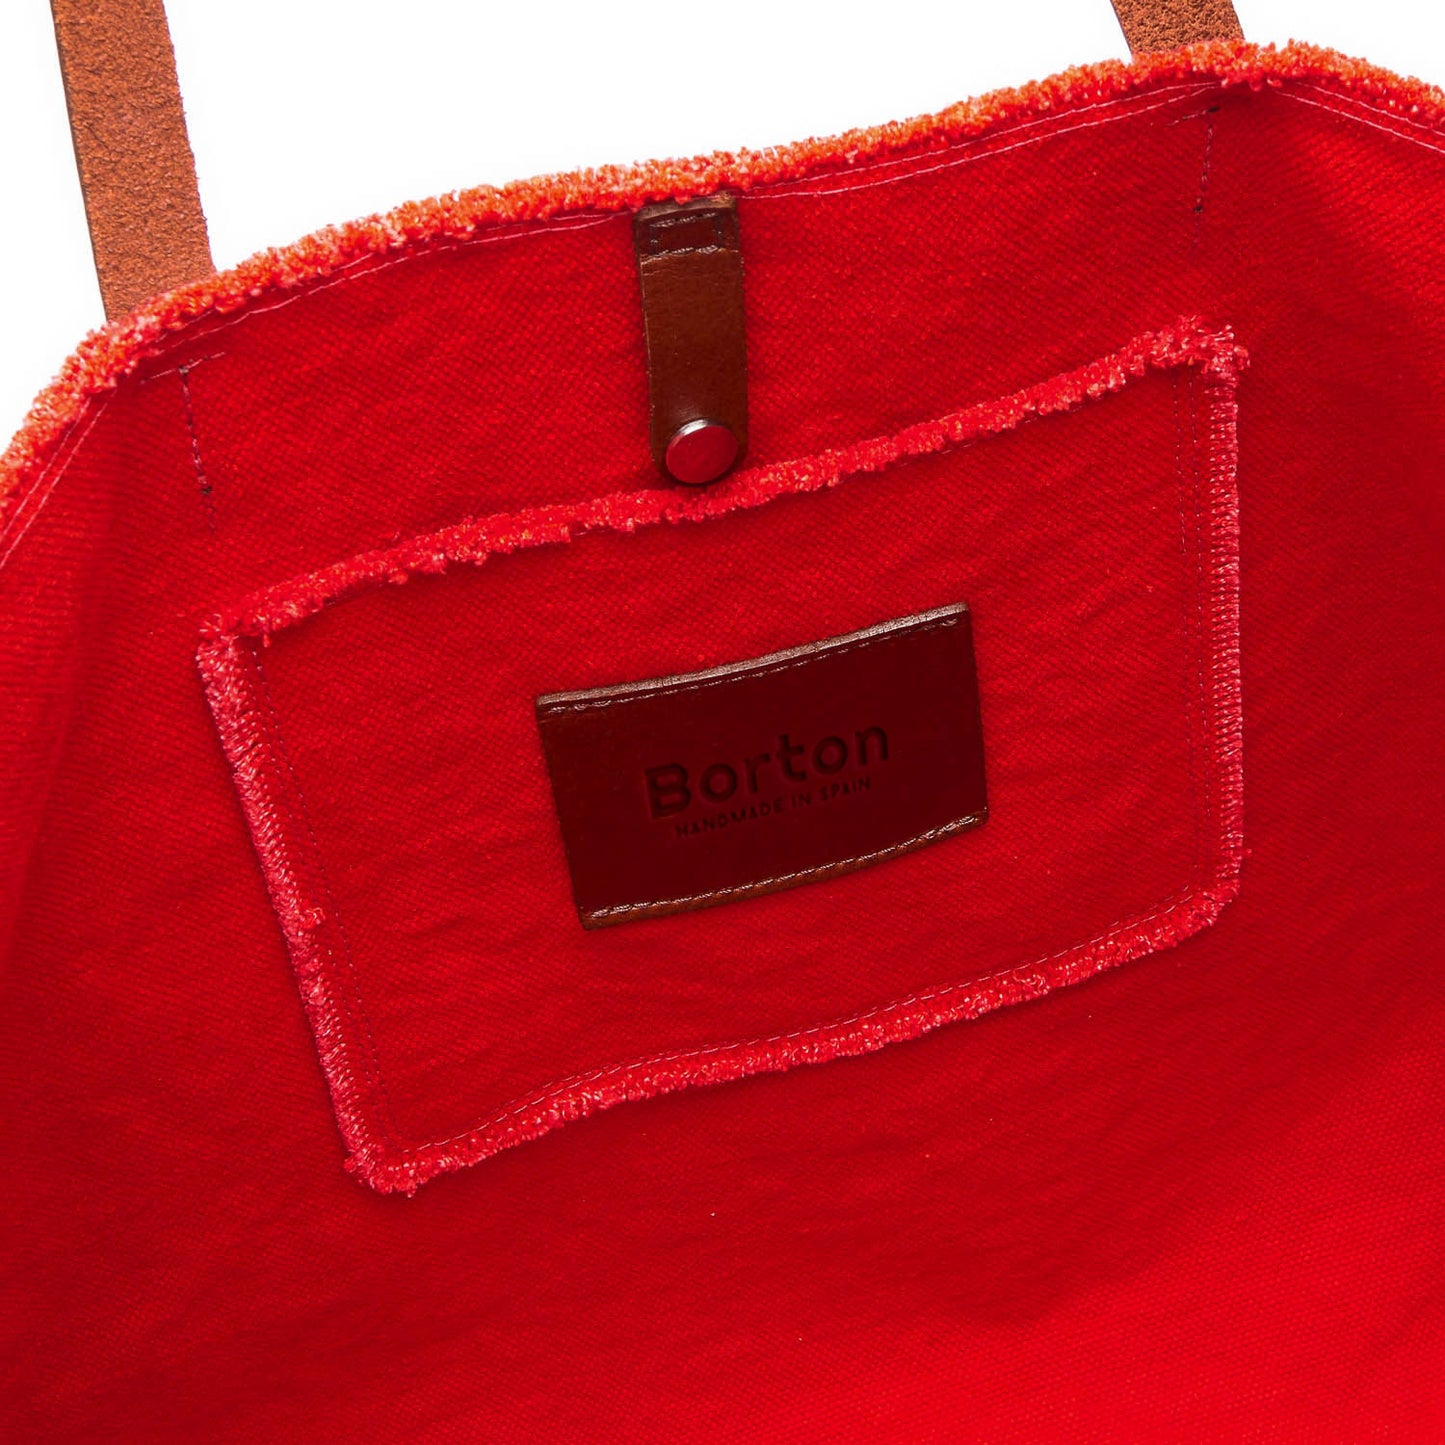 Mery Maxi Tote Red Canvas & Tan Leather